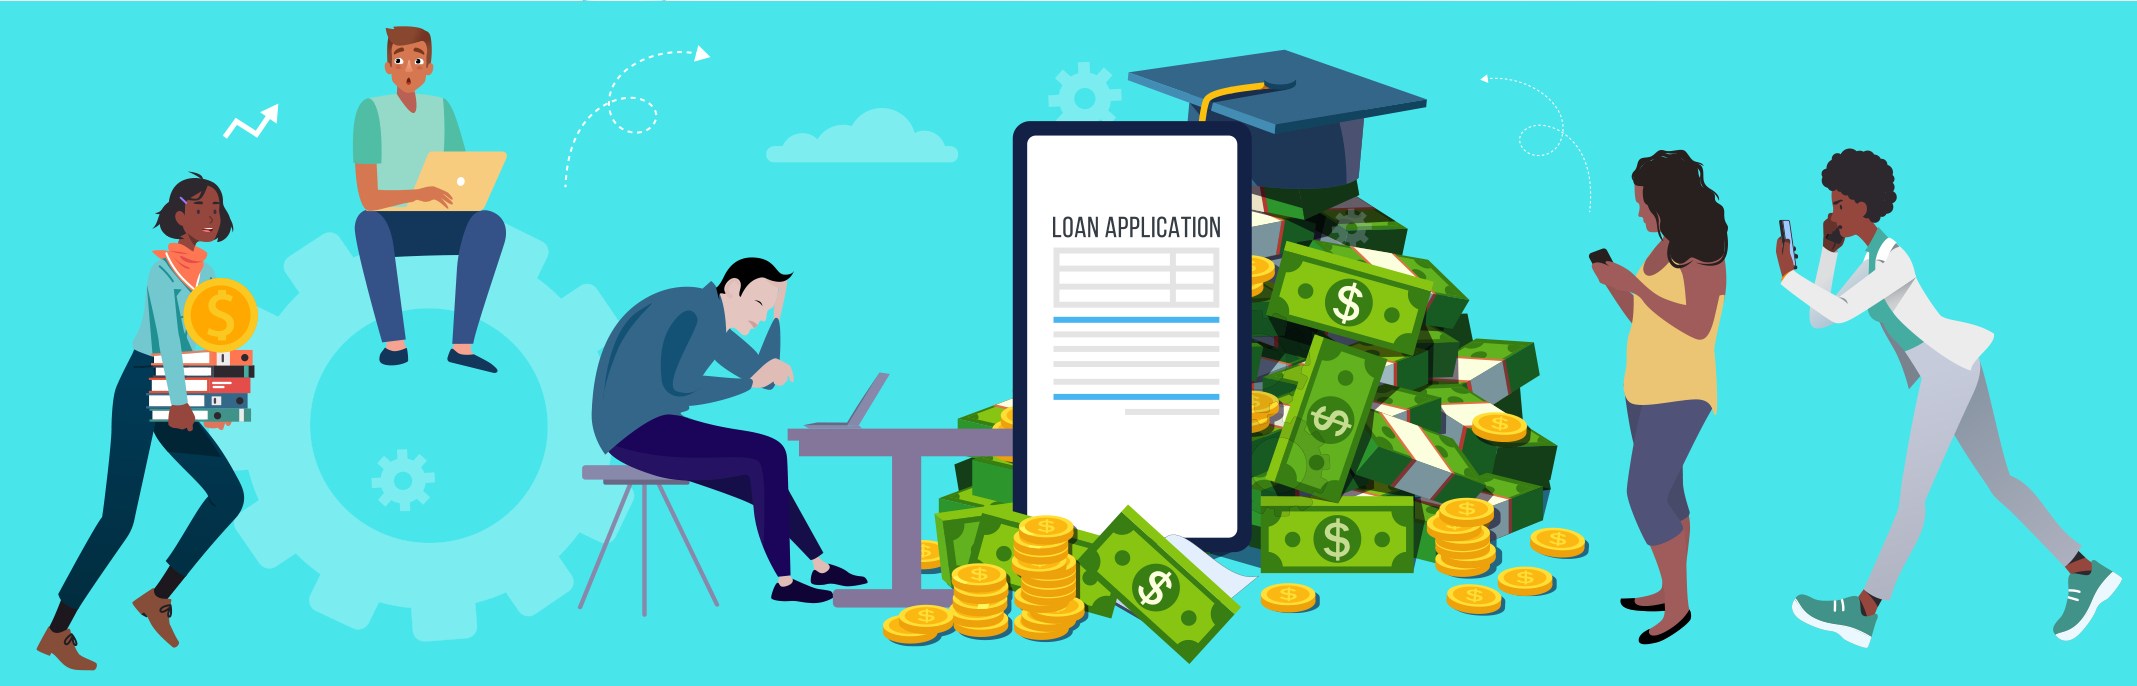 How often you need to apply for a loan banner